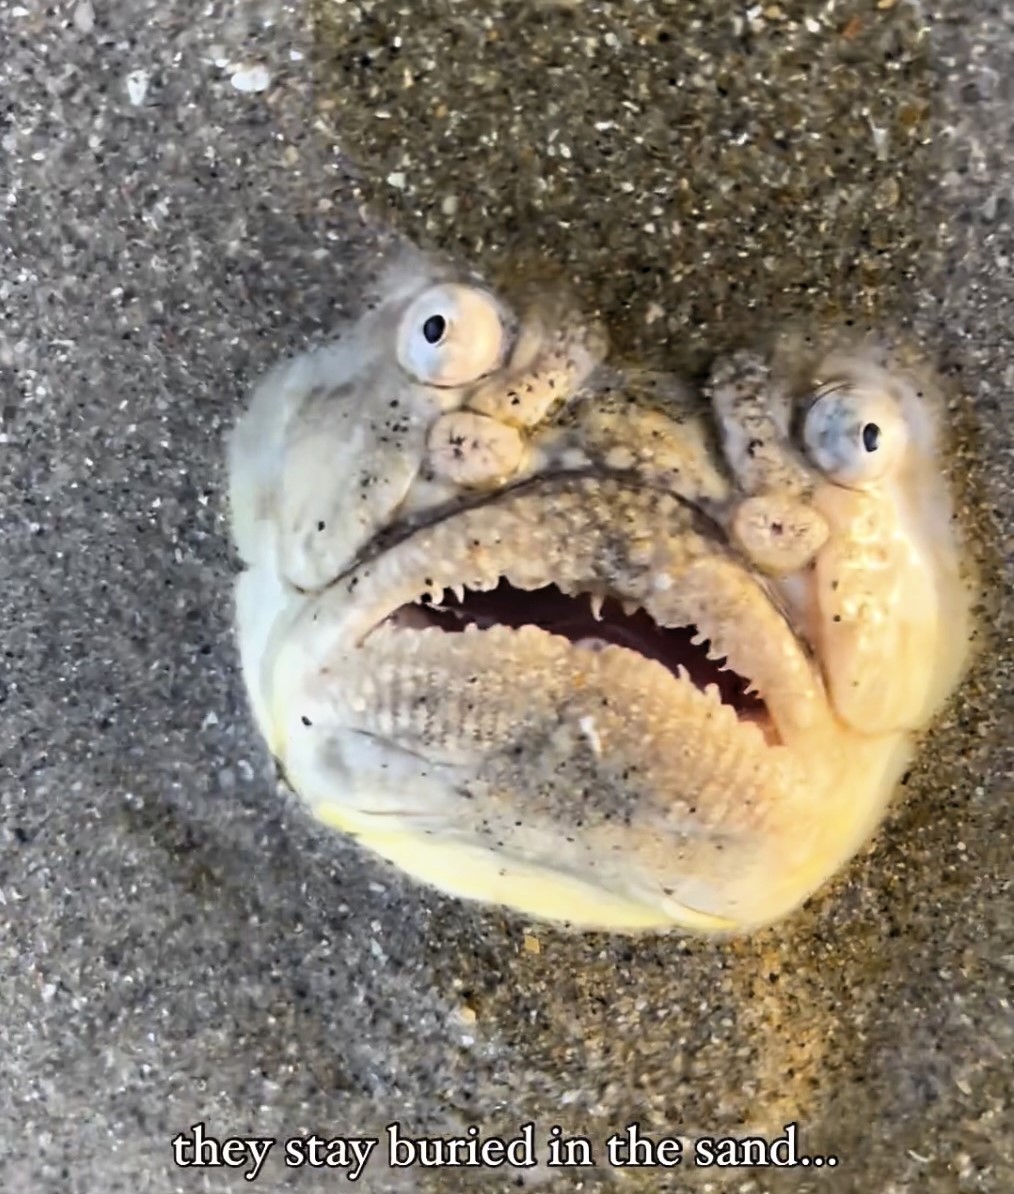 the terrifying longnosed stargazer fish found in Singapore. Venomous, bizarre, and electrifying, this rare sight has social media users vowing never to swim again.